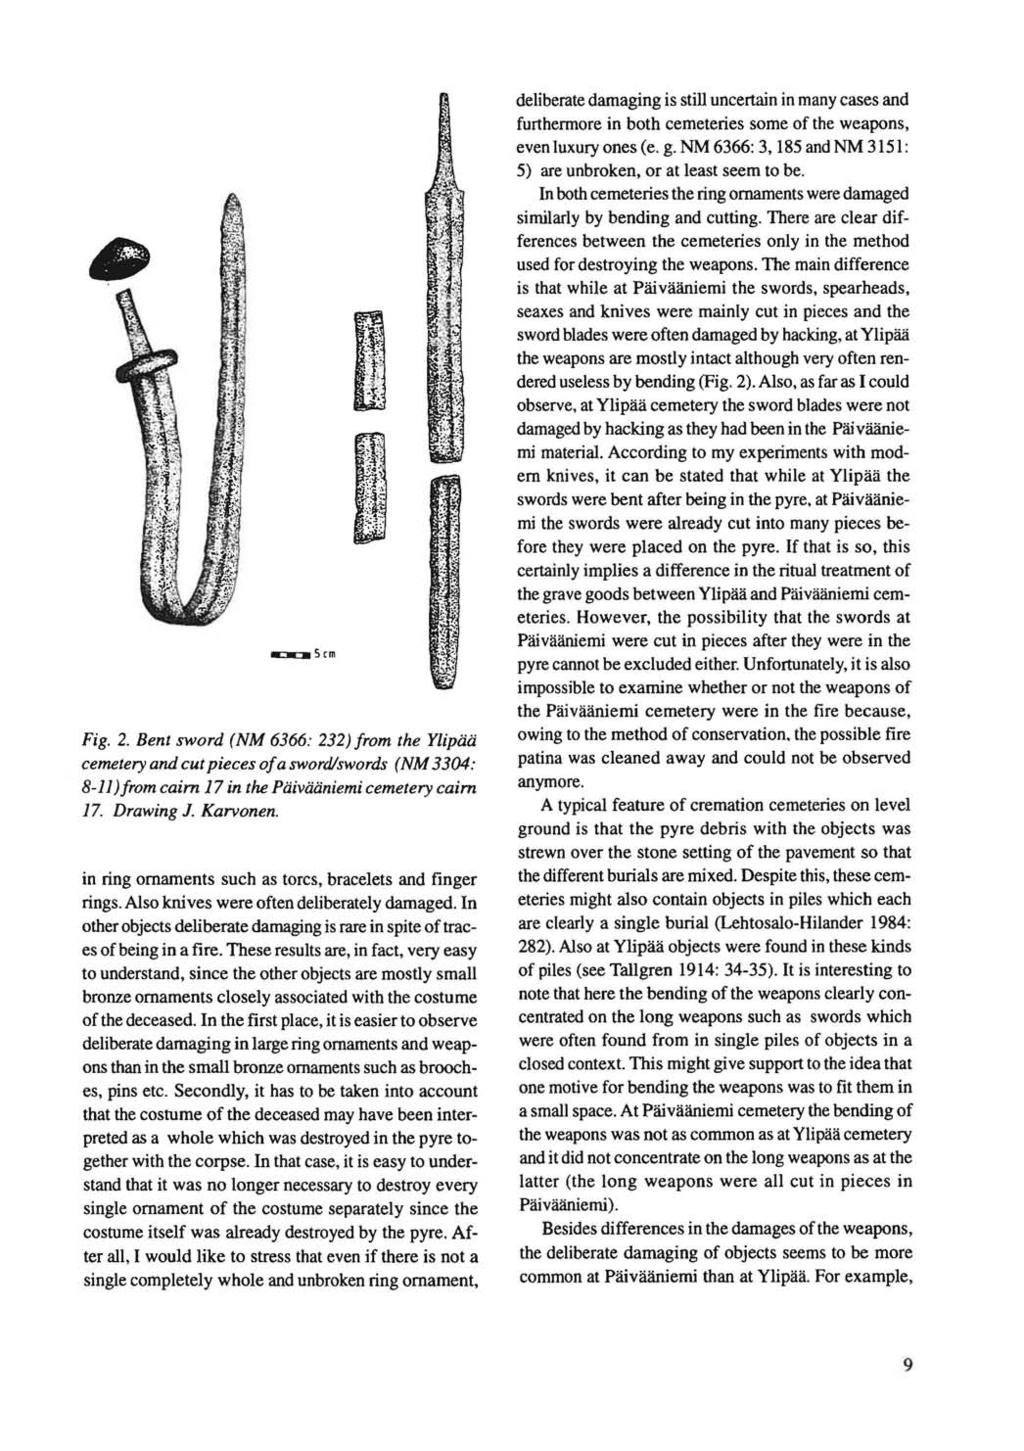 -=-=- 5 em Fig. 2. Bent sword (NM 6366: 232) from the Ylipaa cemetery and cut pieces of a sword/swords (NM 3304: 8-11) from cairn 17 in the Paivaaniemi cemetery cairn 17. Drawing J. Karvonen.